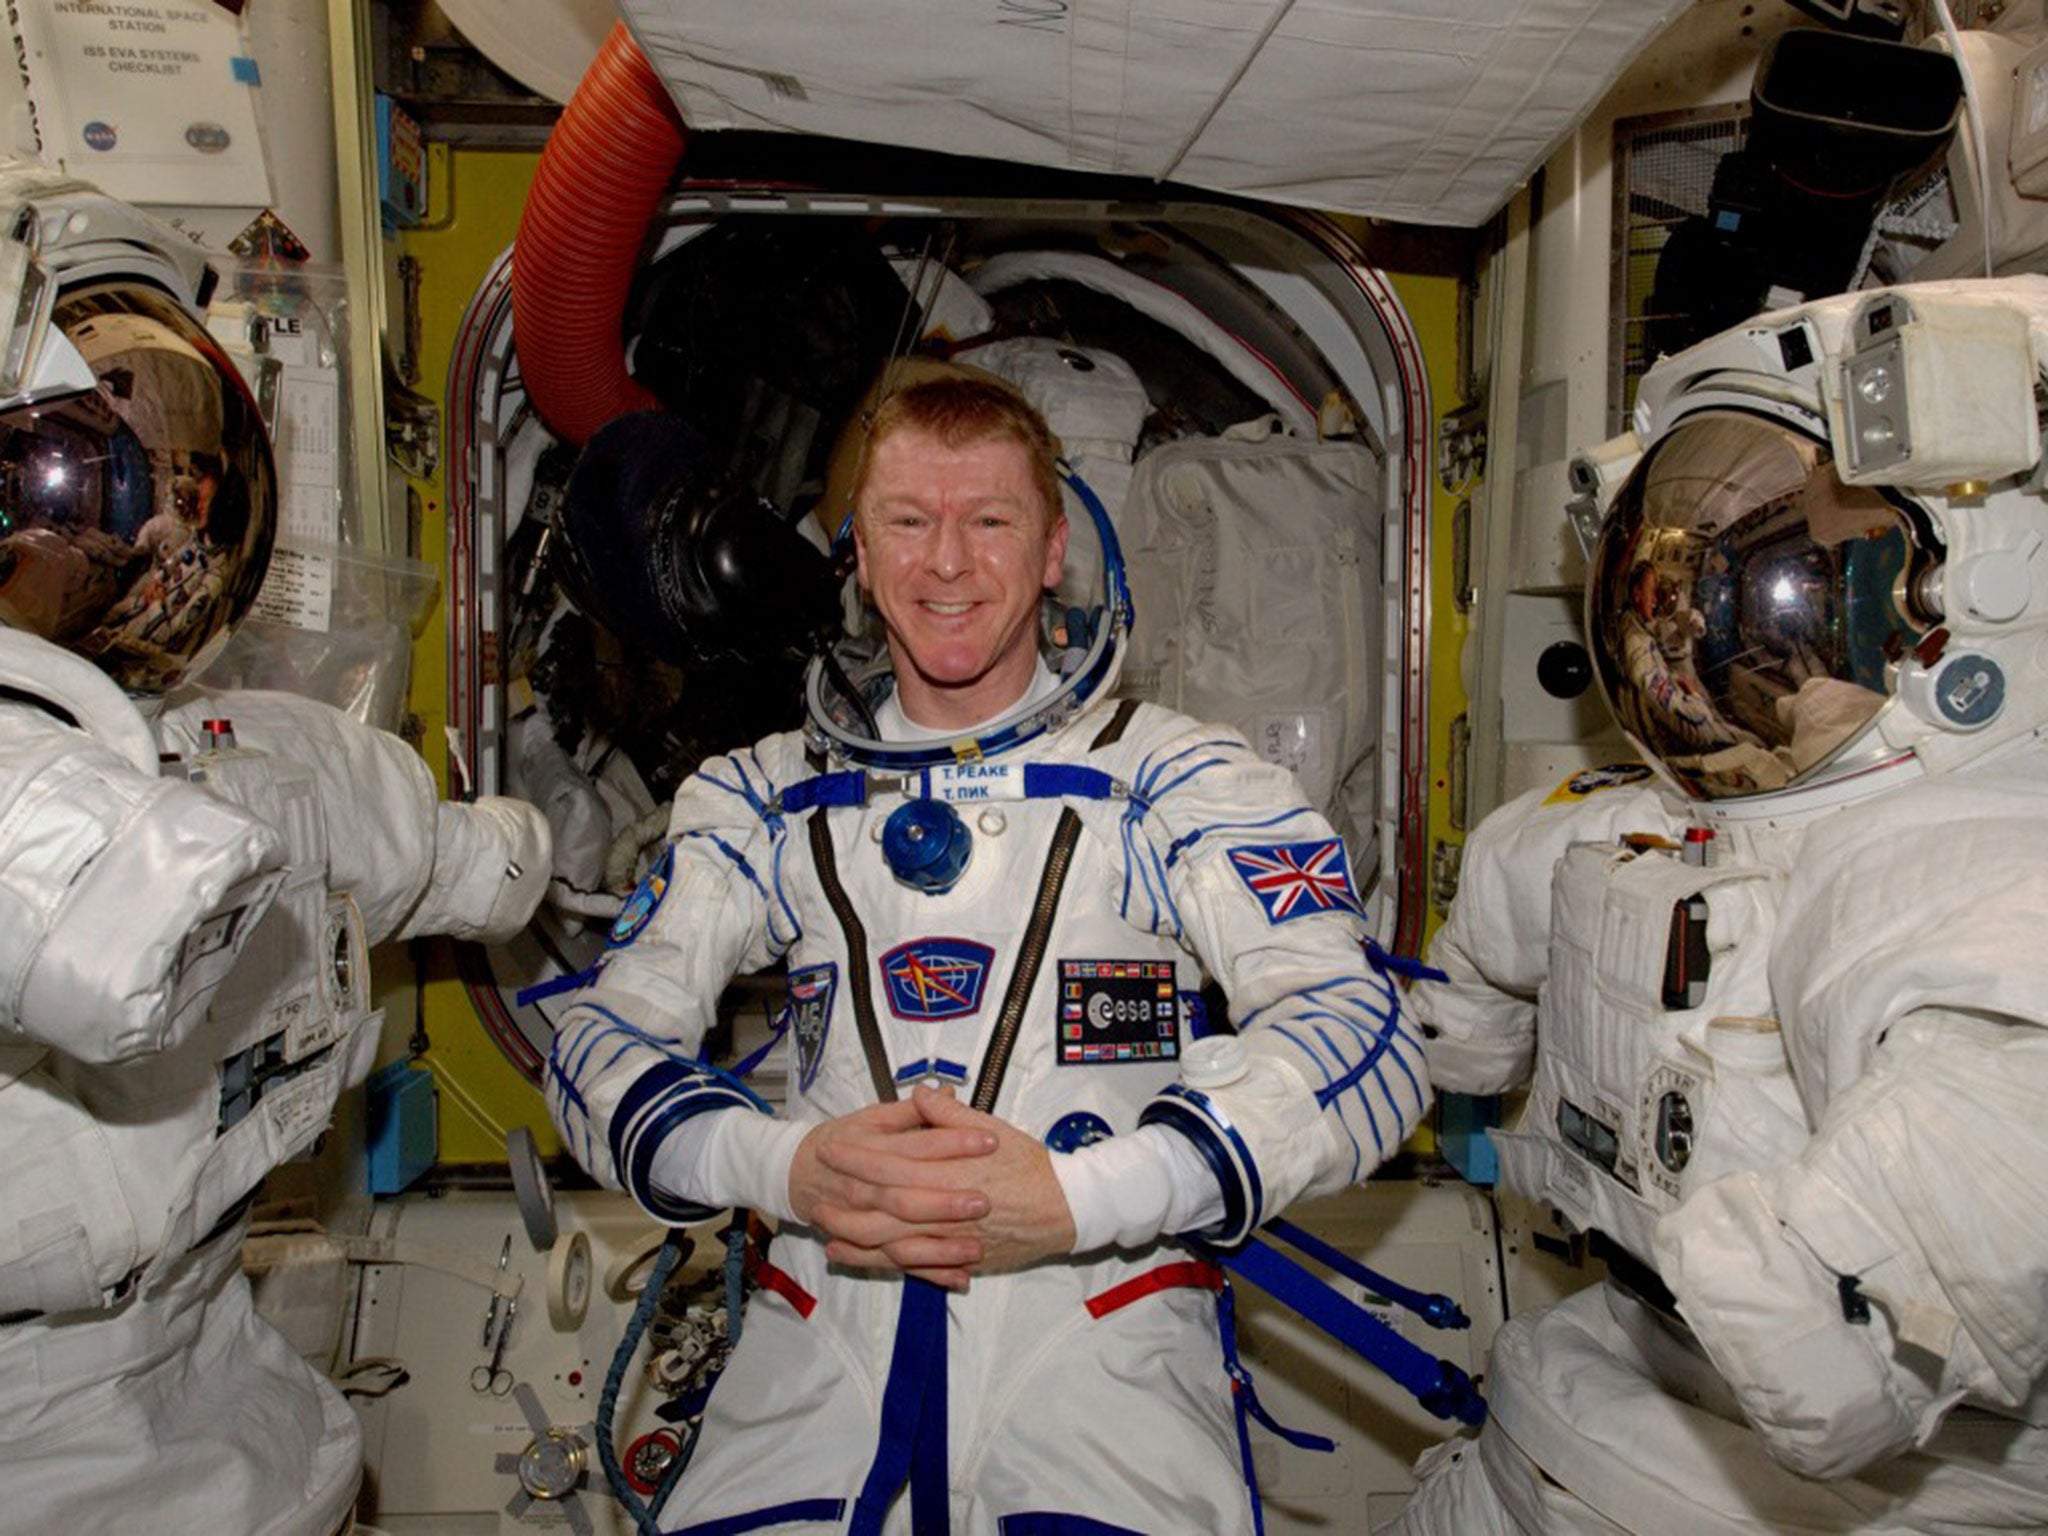 Queen's Birthday Honours: Astronaut Tim Peake received news of honour while  aboard space station, The Independent